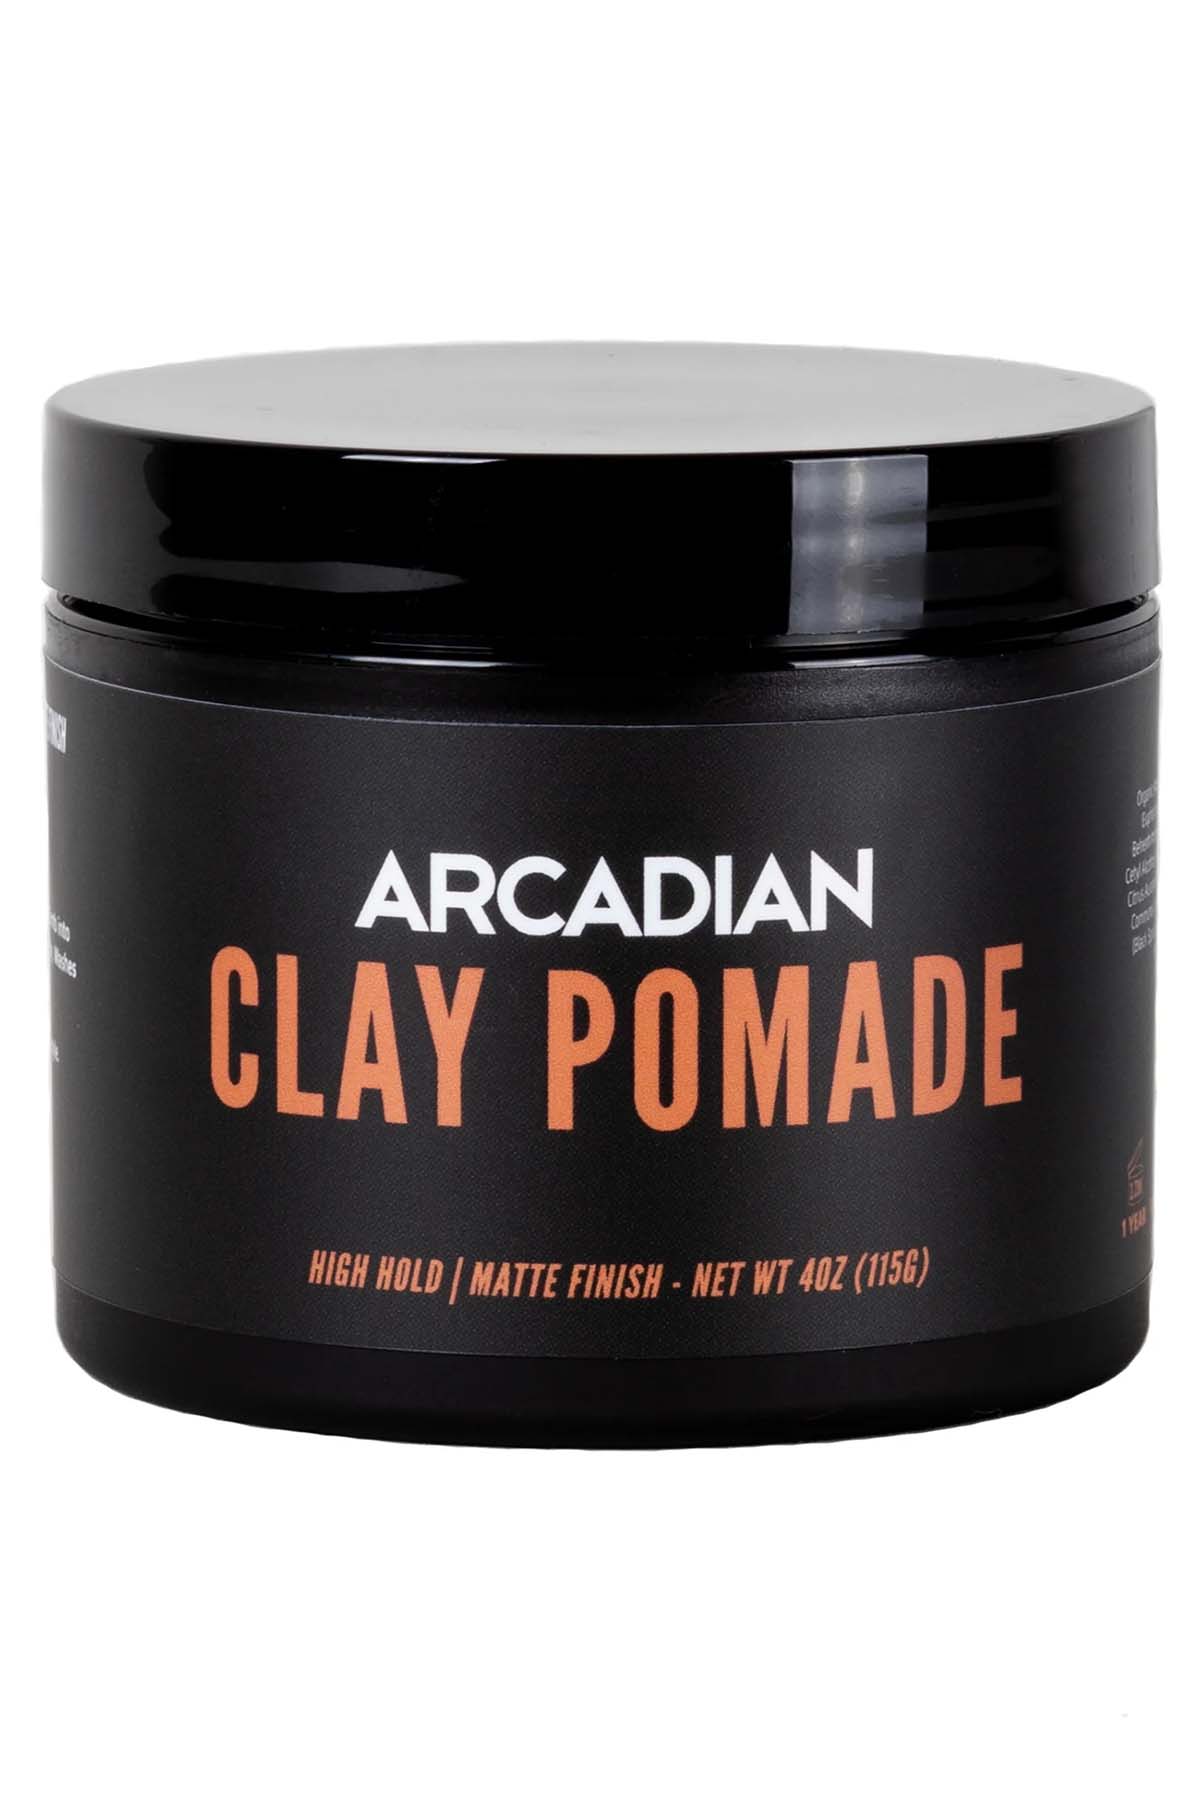 Arcadian Clay Pomade Hair Styling Clay